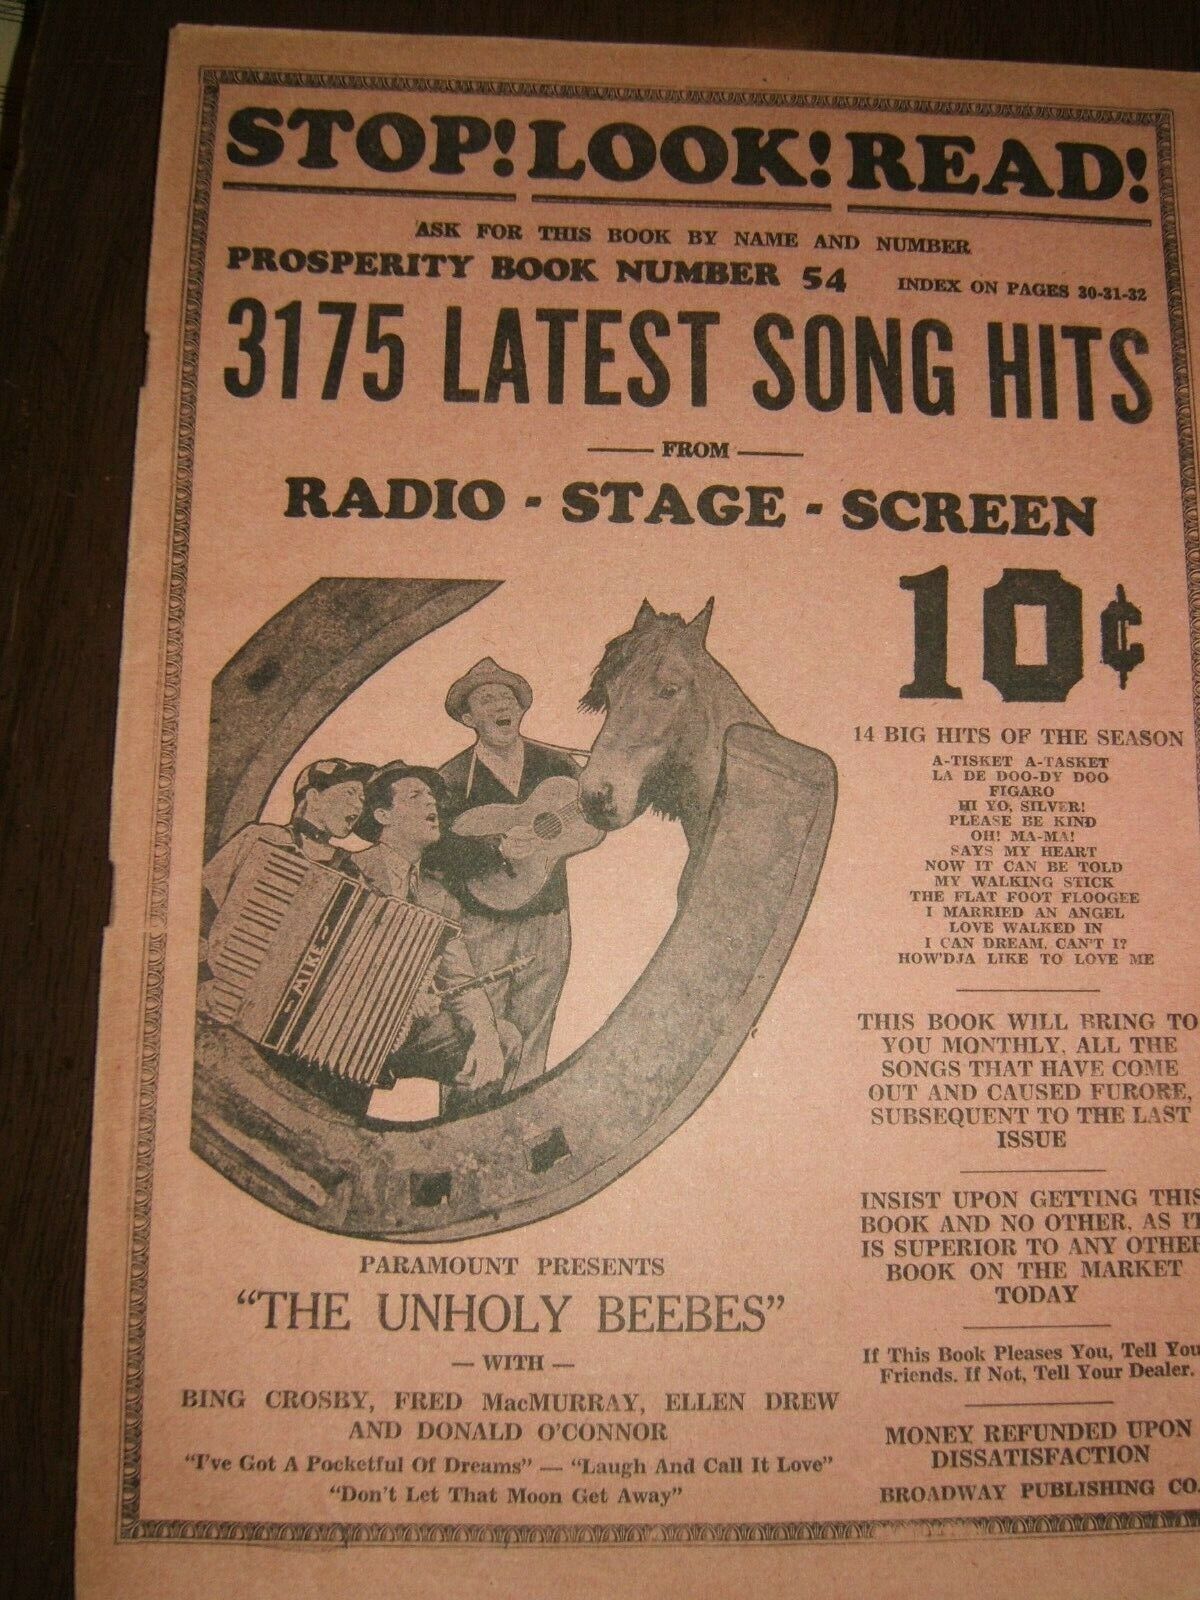 Vintage 1930s PROSPERITY LATEST SONG HITS BOOK Number 54-FROM RADIO STAGE SCREEN